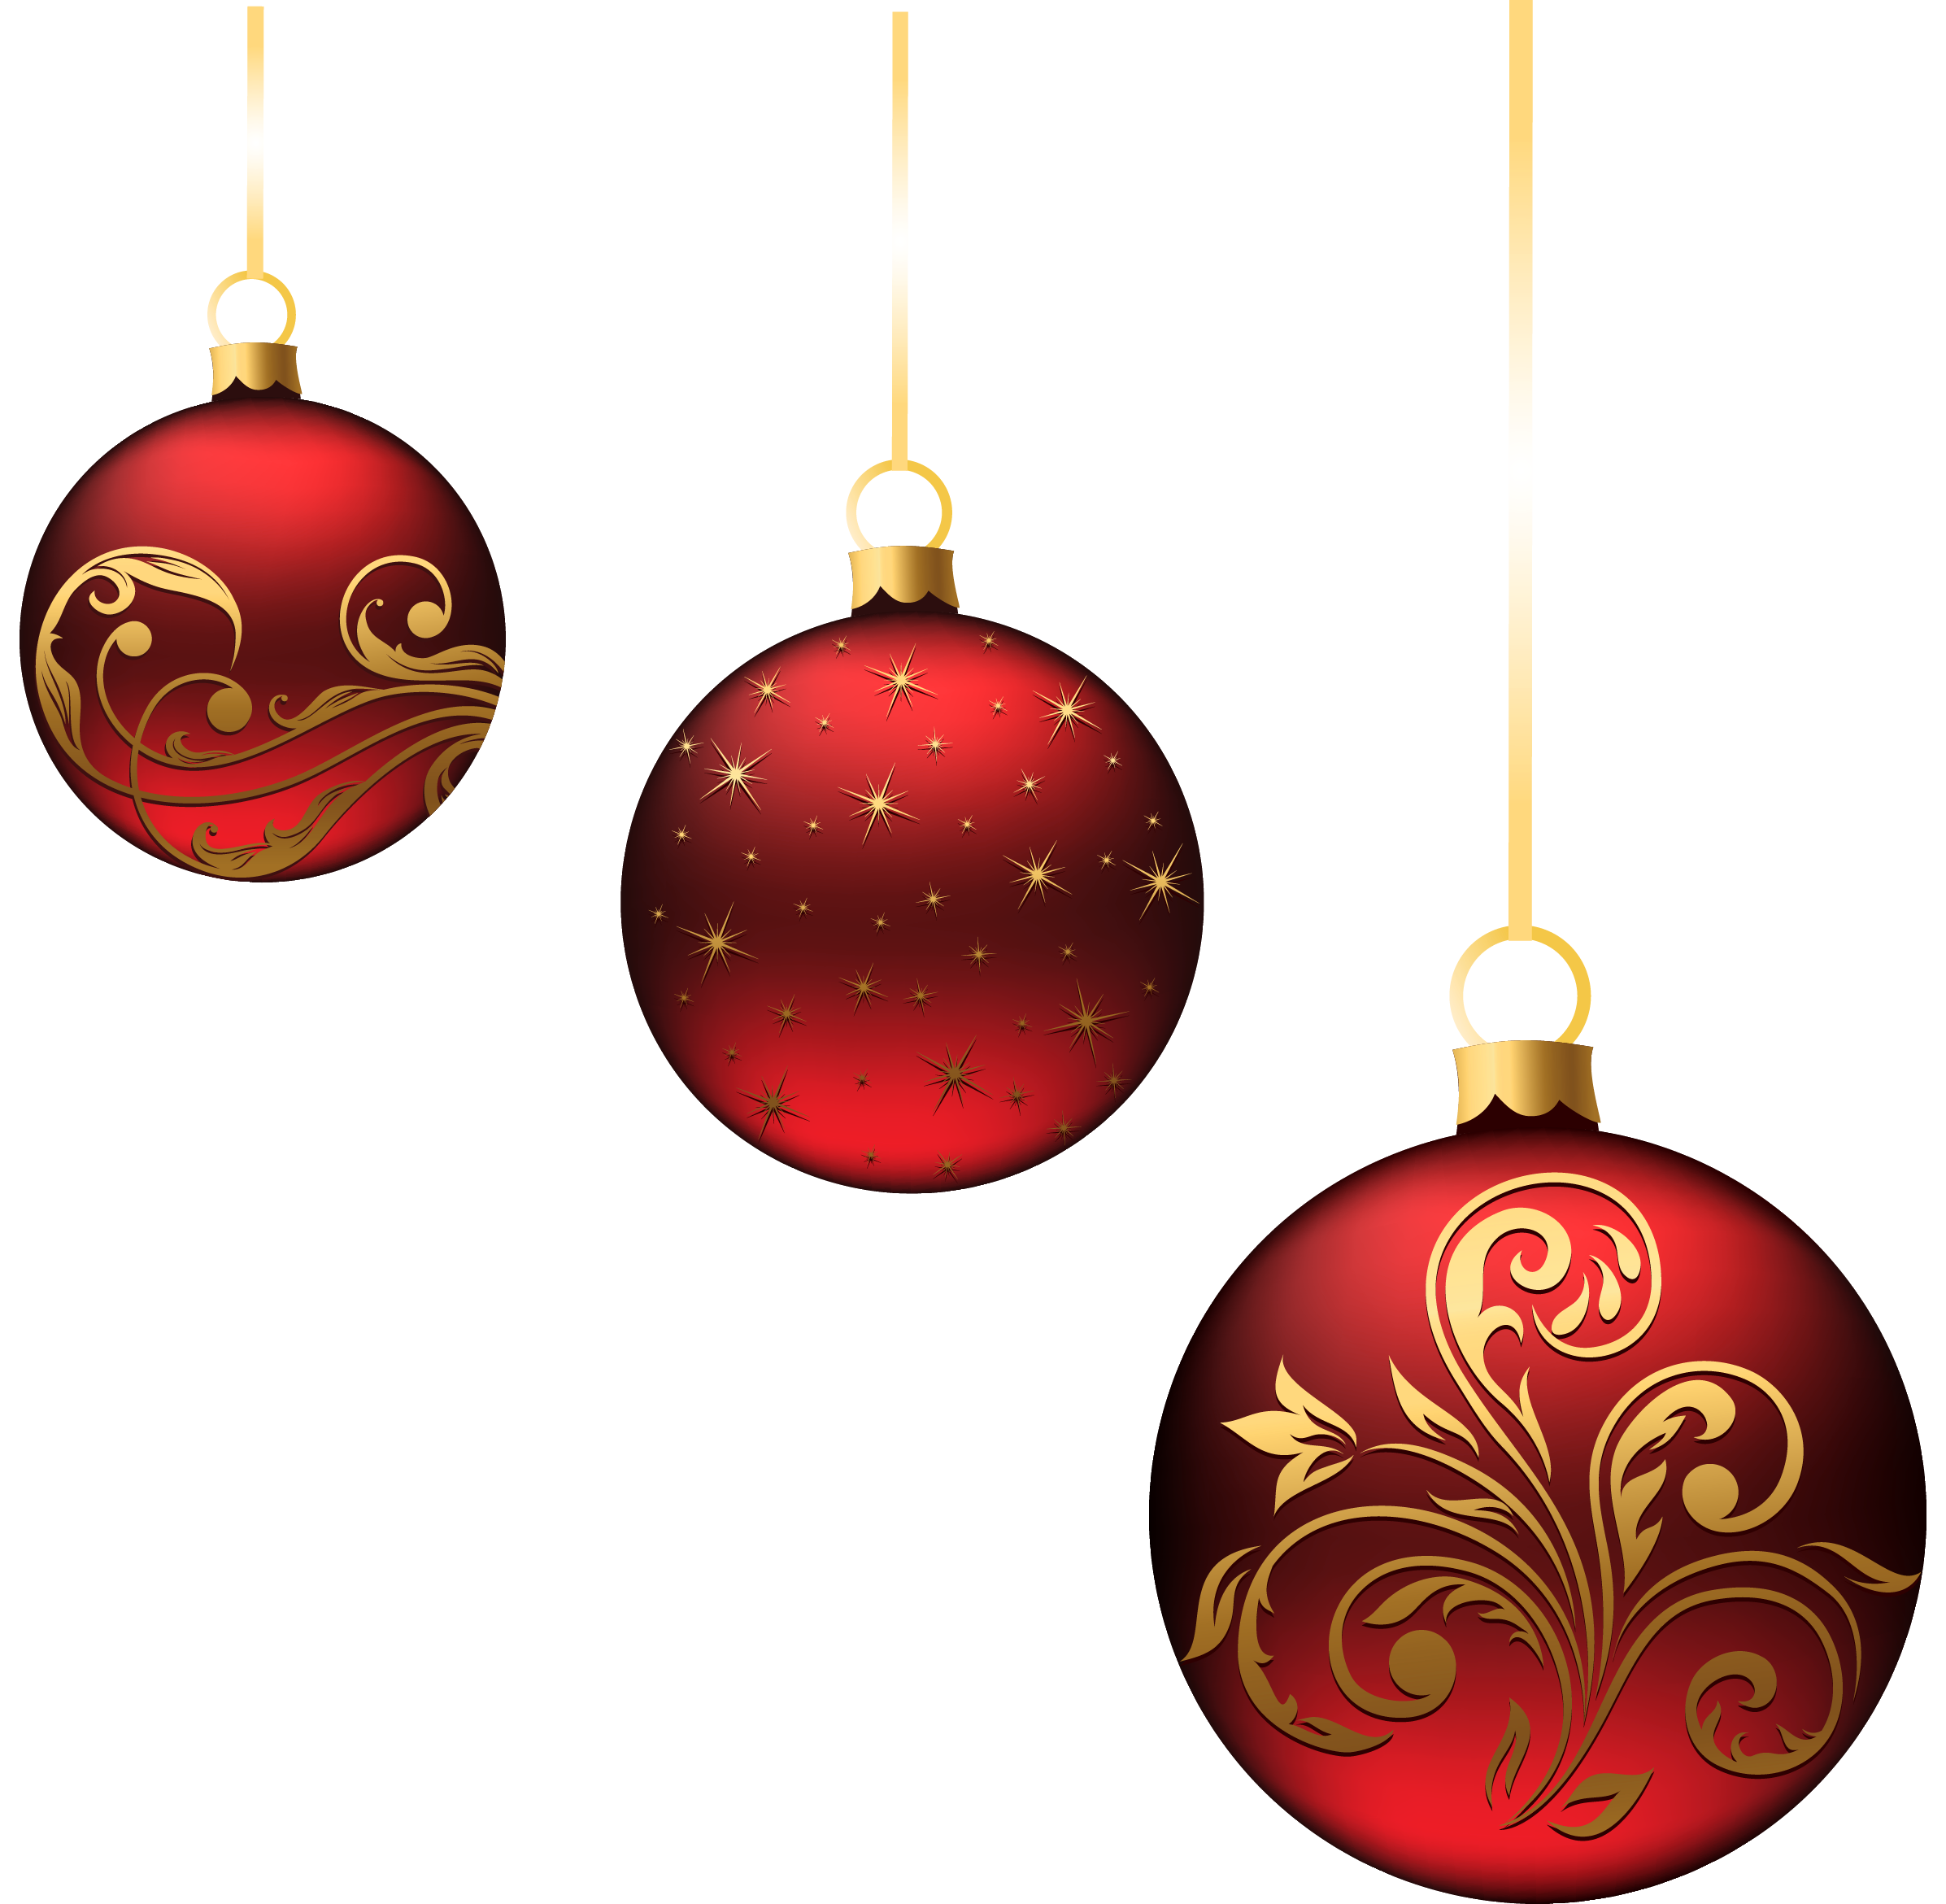 Christmas ball decorations pale. Ornaments clipart pink ornament